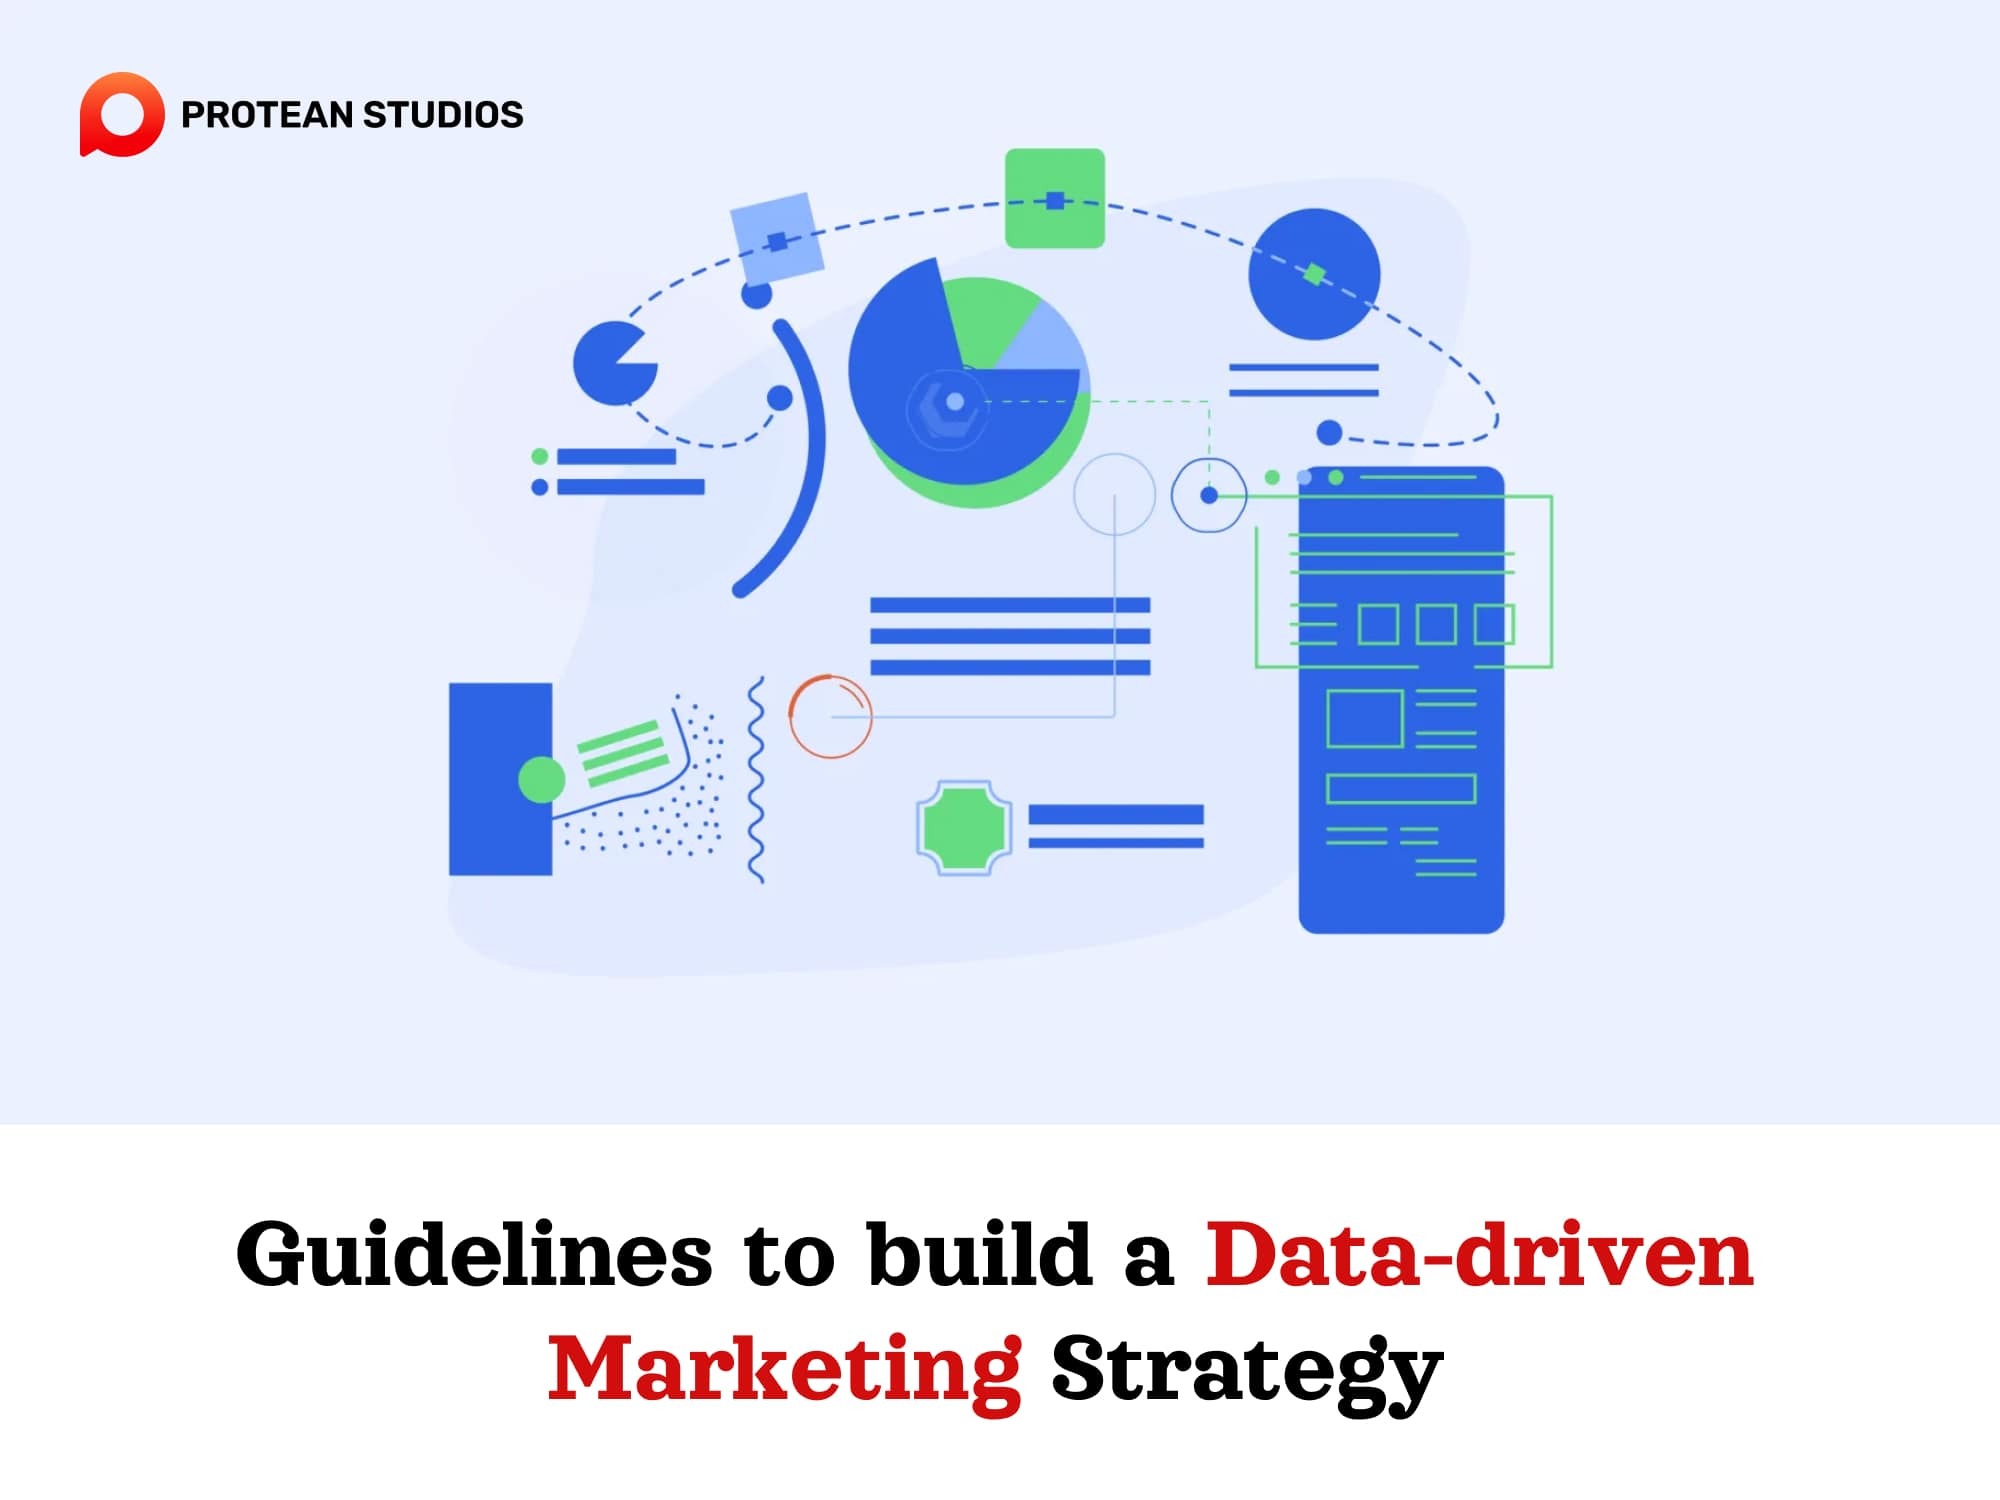 Four basic steps to building a great data marketing plan